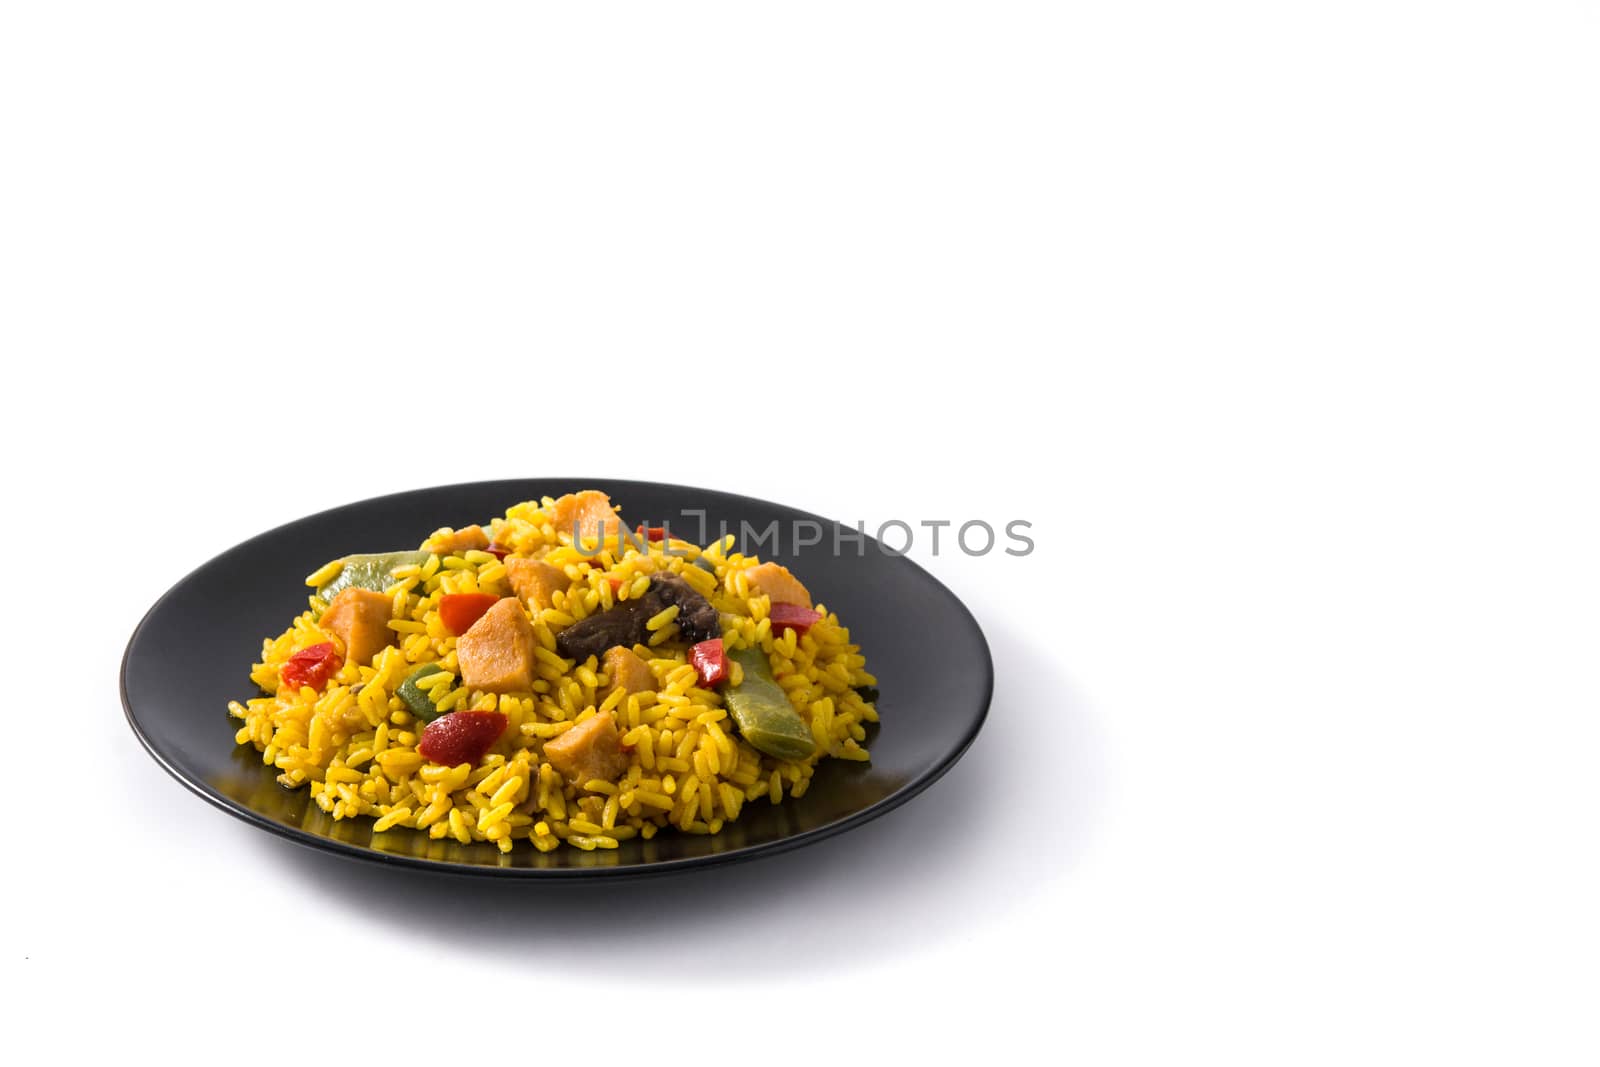 Fried rice with chicken and vegetables on black plate isolated on white background copy space by chandlervid85